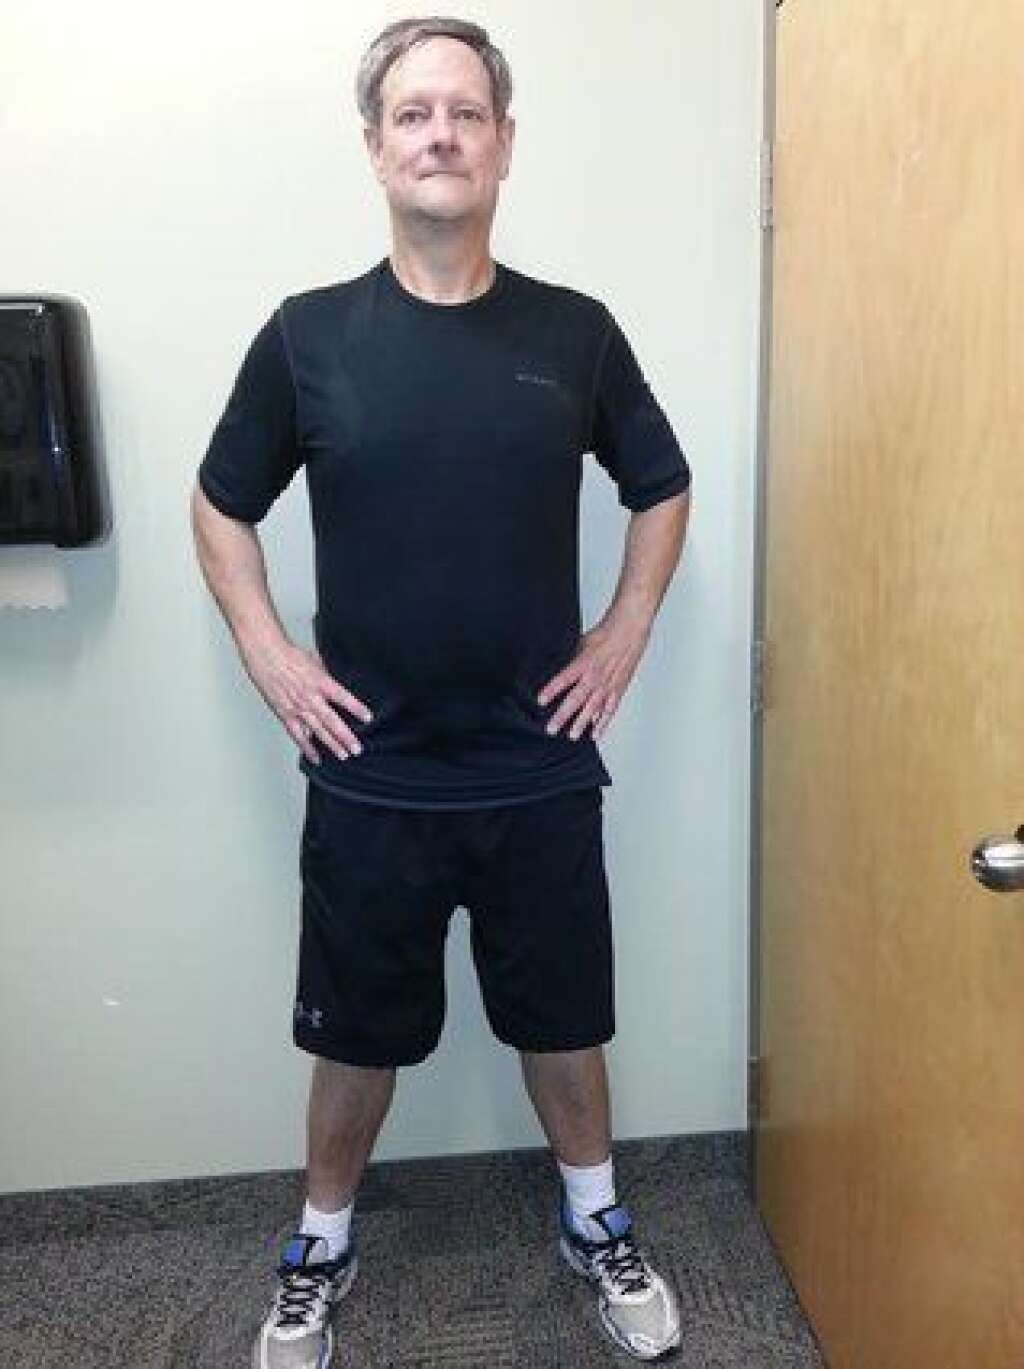 Steven AFTER - Total weight lost: 85 pounds <a href="http://www.huffingtonpost.ca/2015/09/09/weight-lost_n_8111098.html" target="_blank">Read his story here.</a>